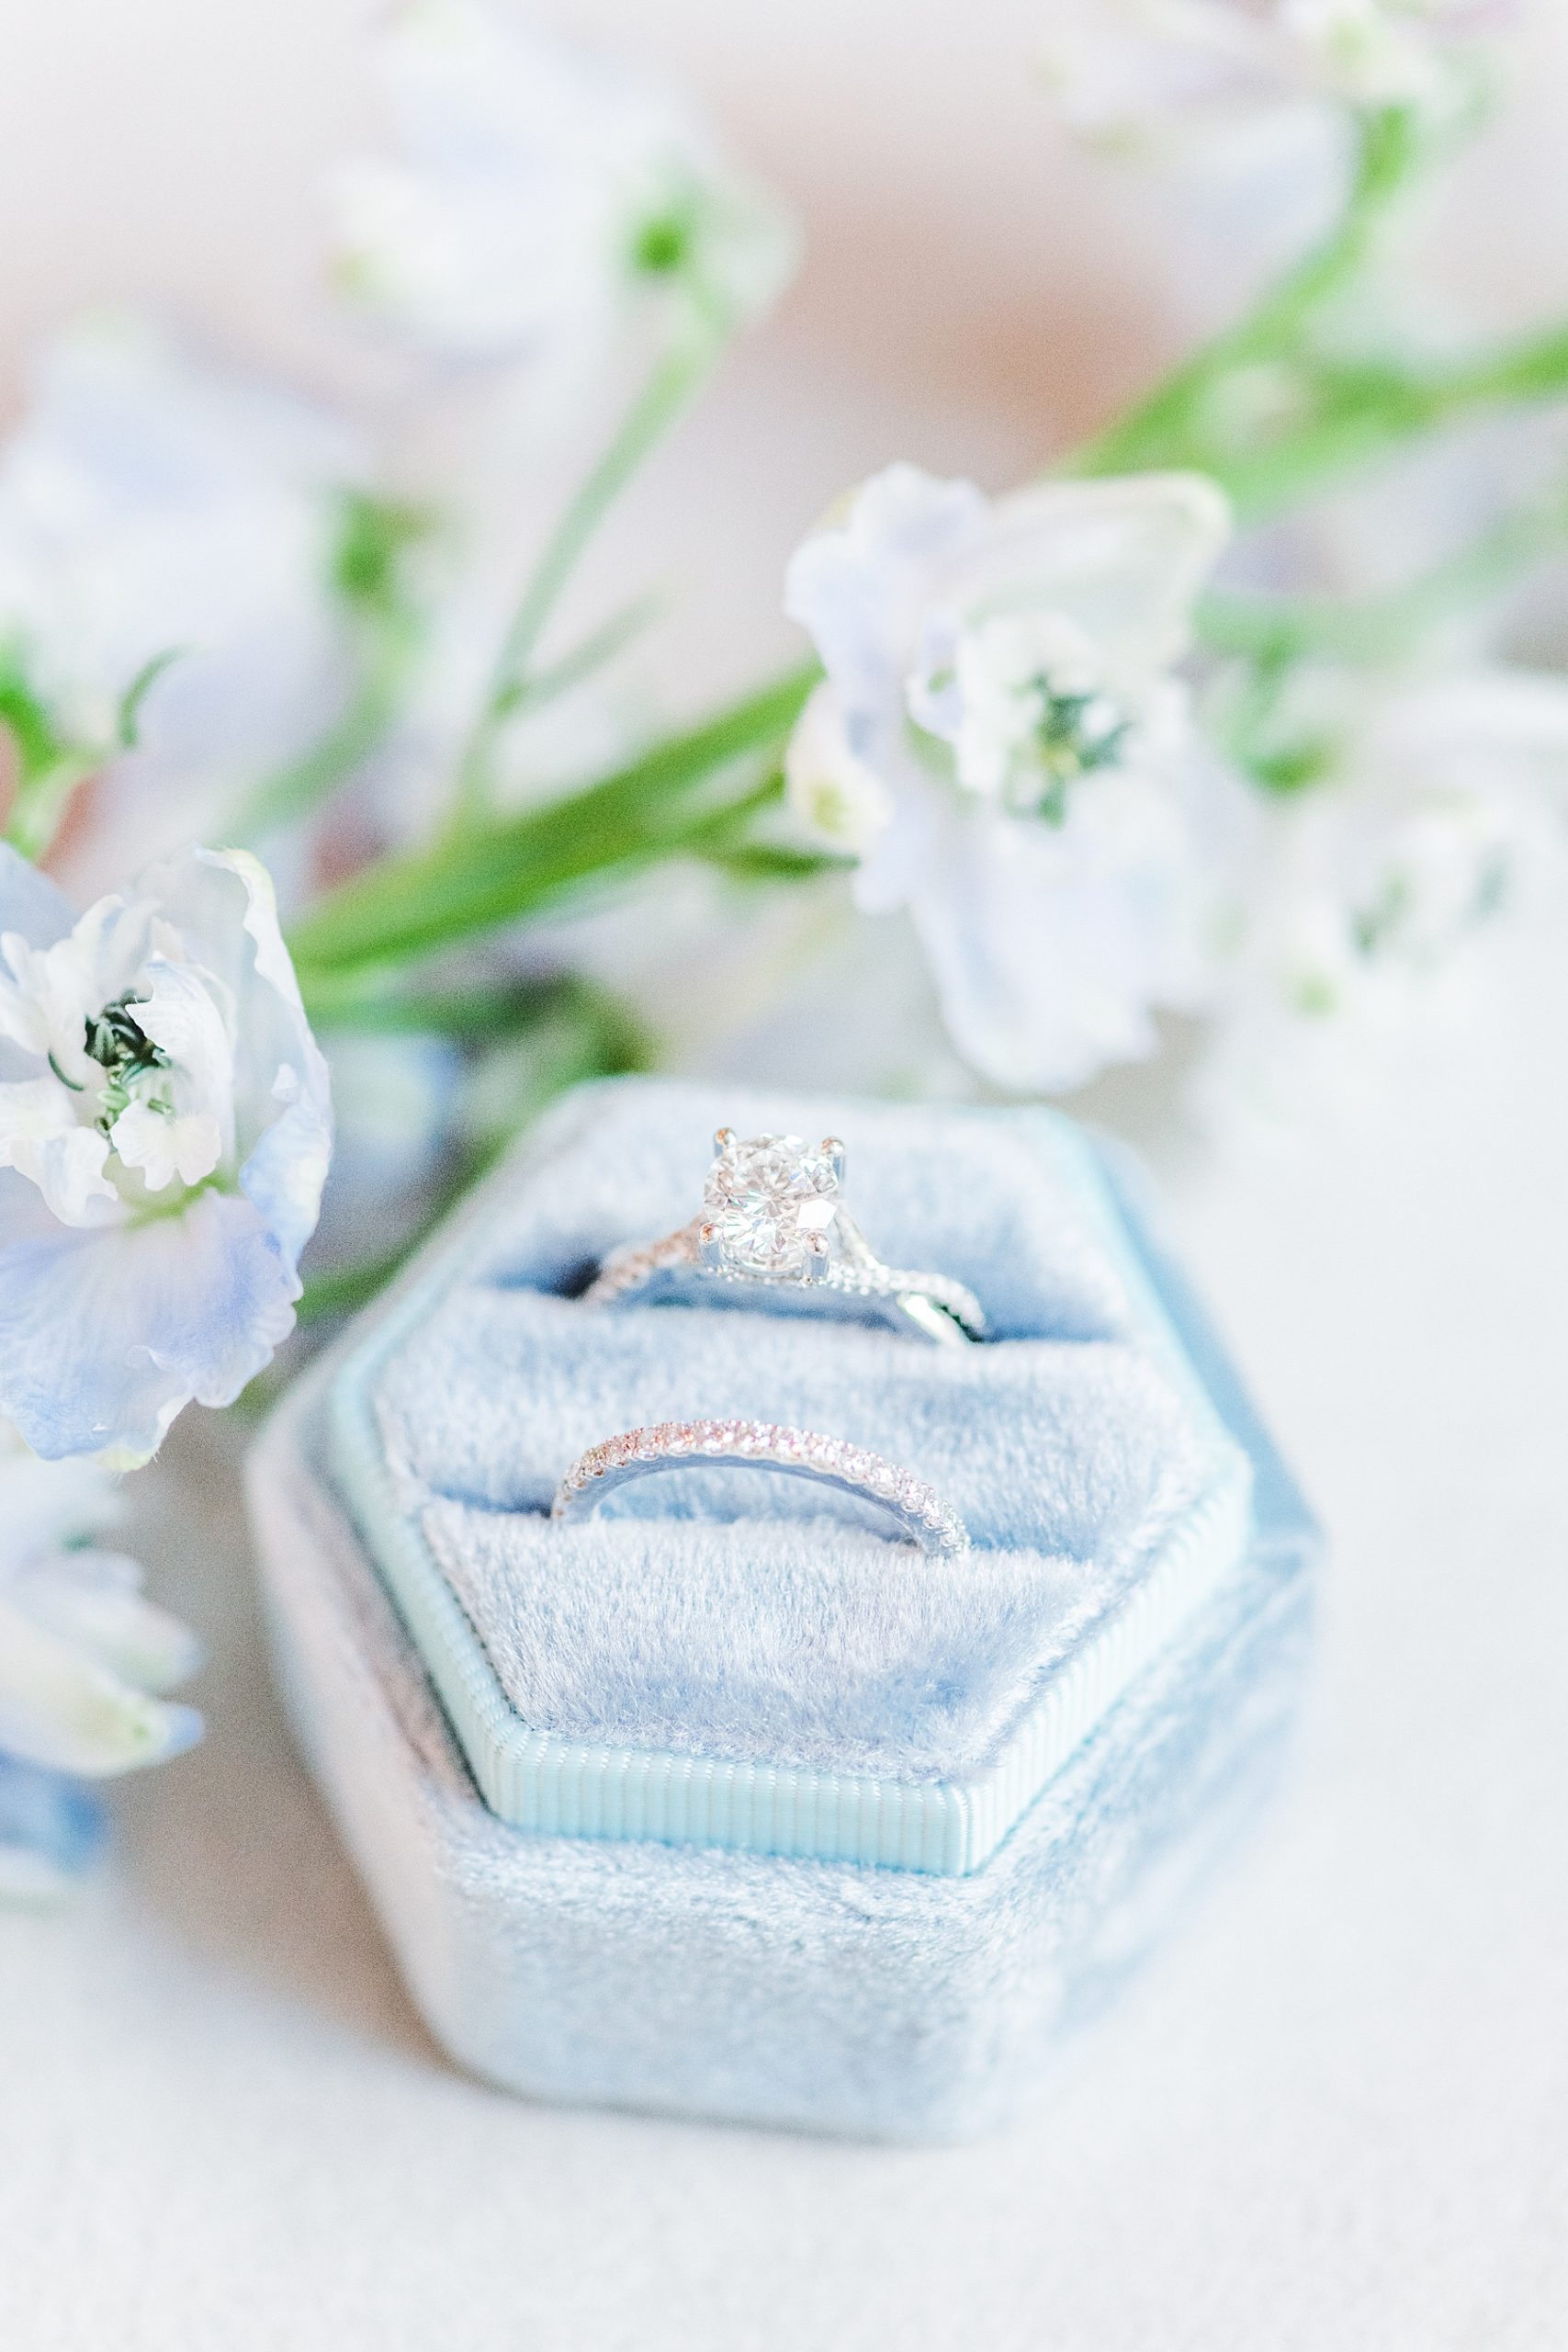 Wedding Ring Box for Details | The Delamater House Wedding | Chynna Pacheco Photography-15